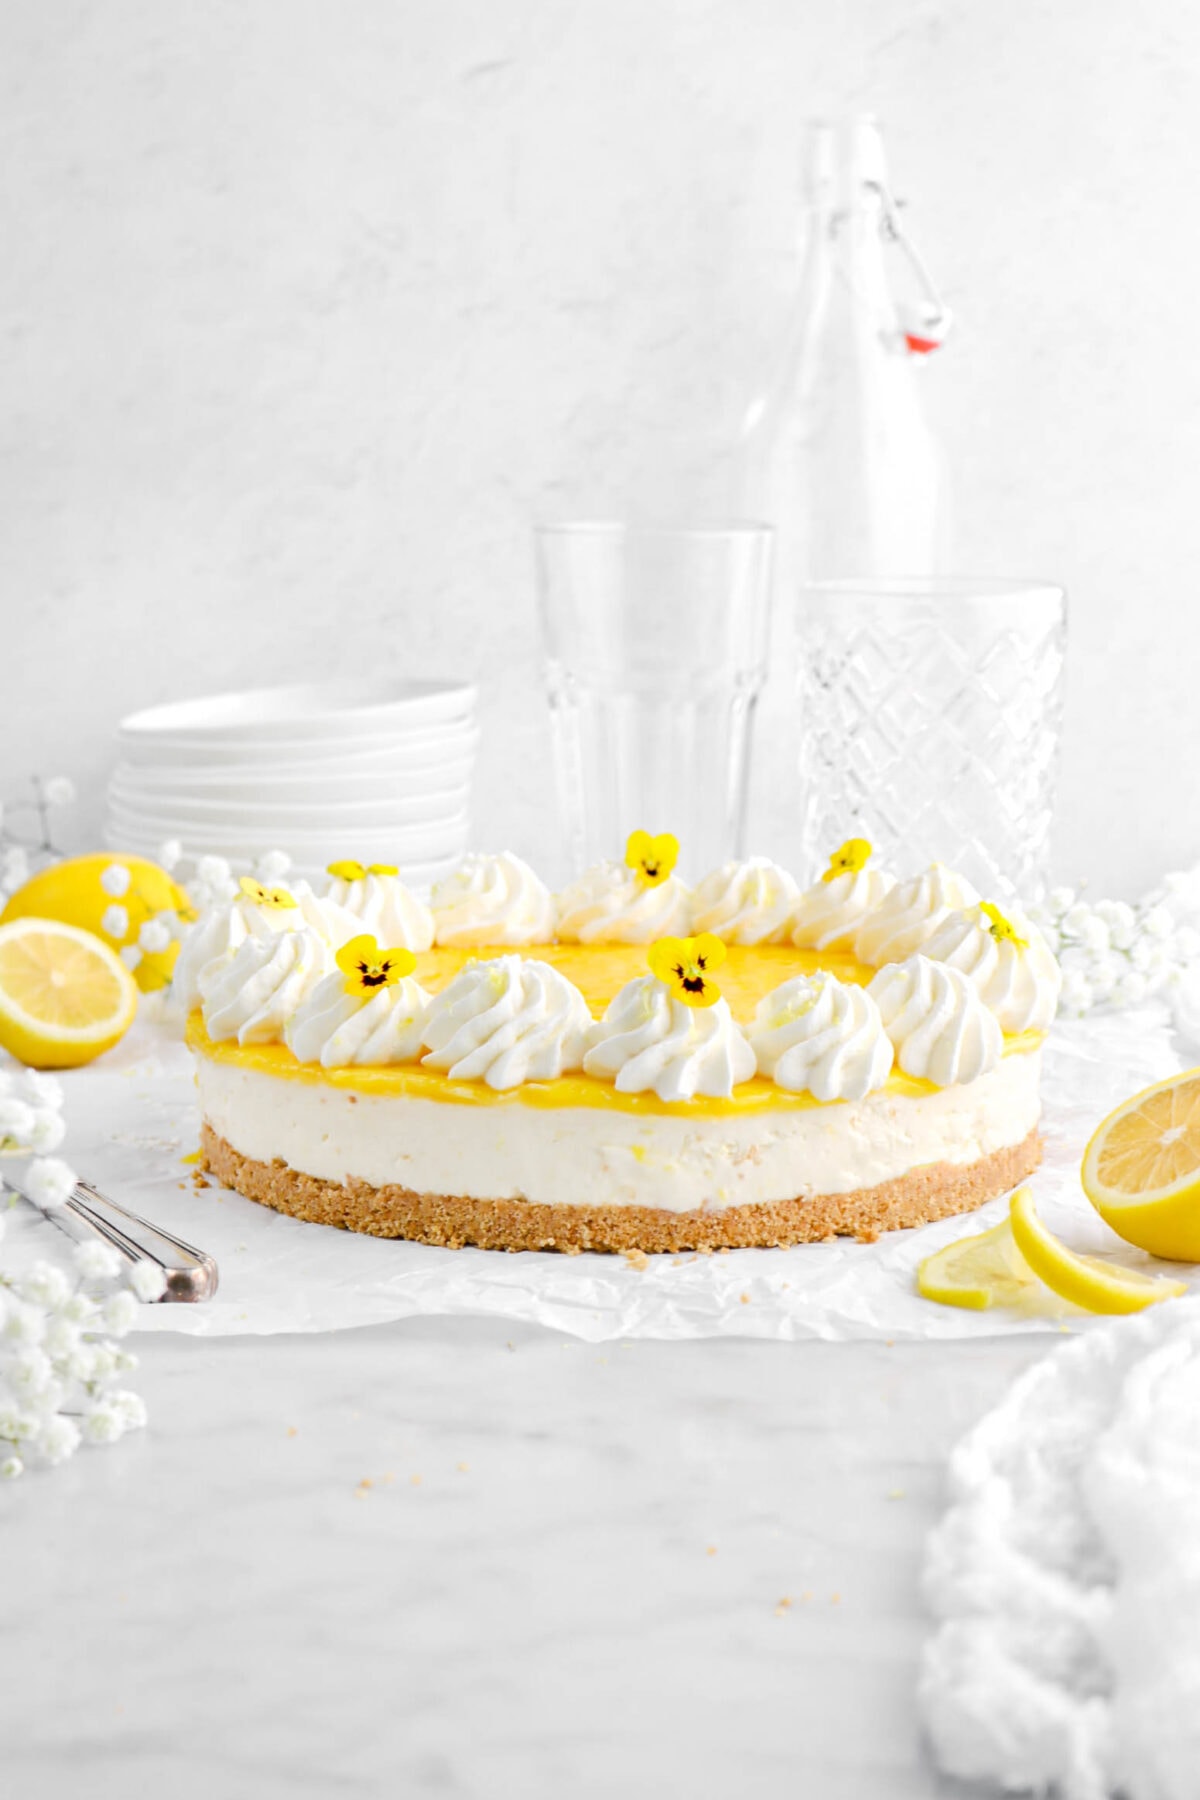 front shot of lemon cheesecake on parchment paper with piped whipped cream and yellow flowers on top, with lemons, and white flowers around.